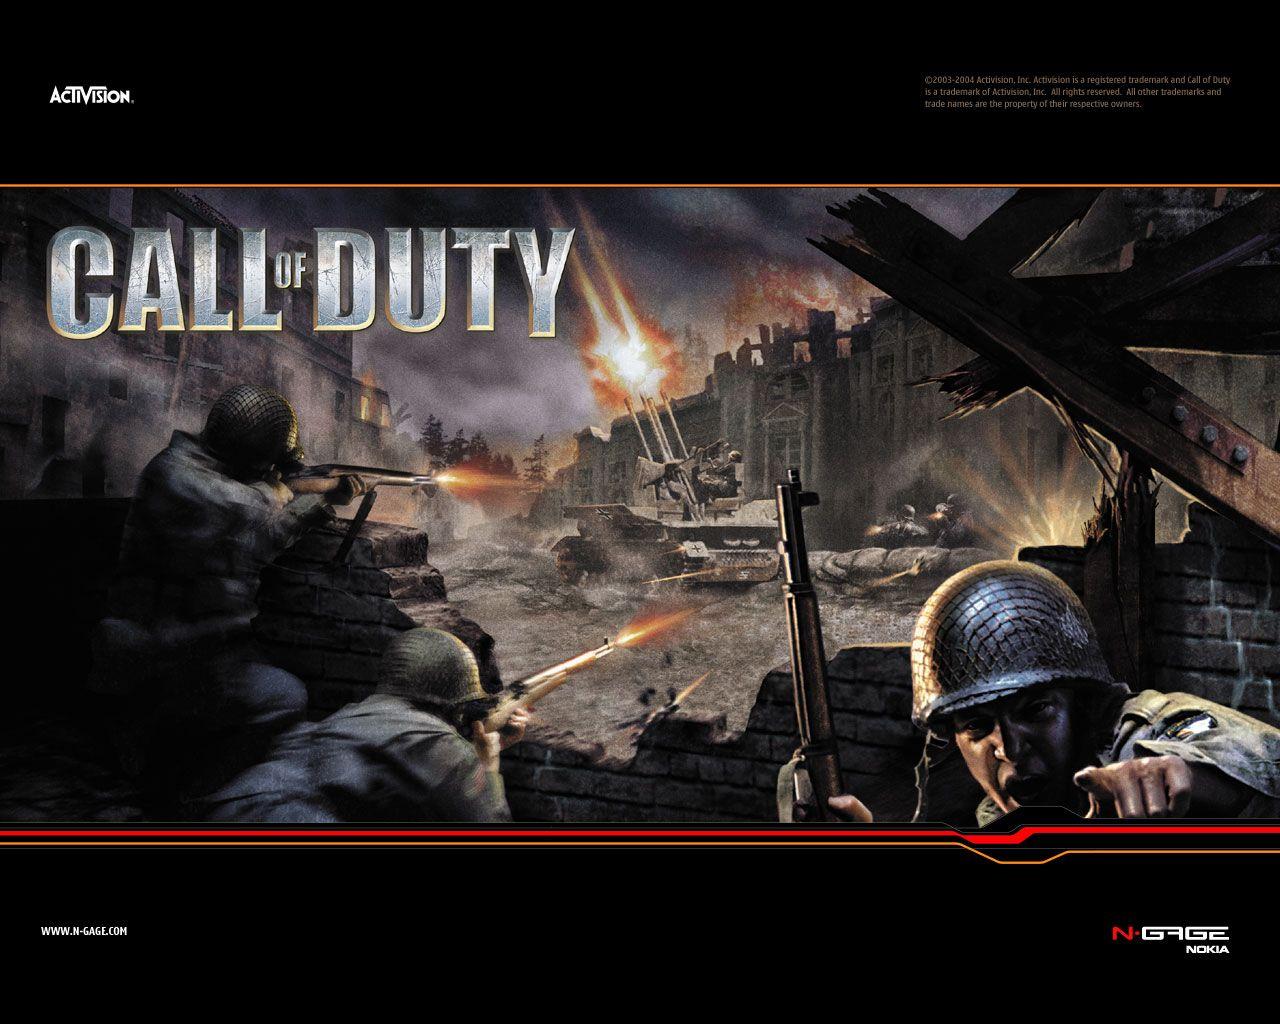 PS2 online games image COD wallpaper HD wallpaper and background